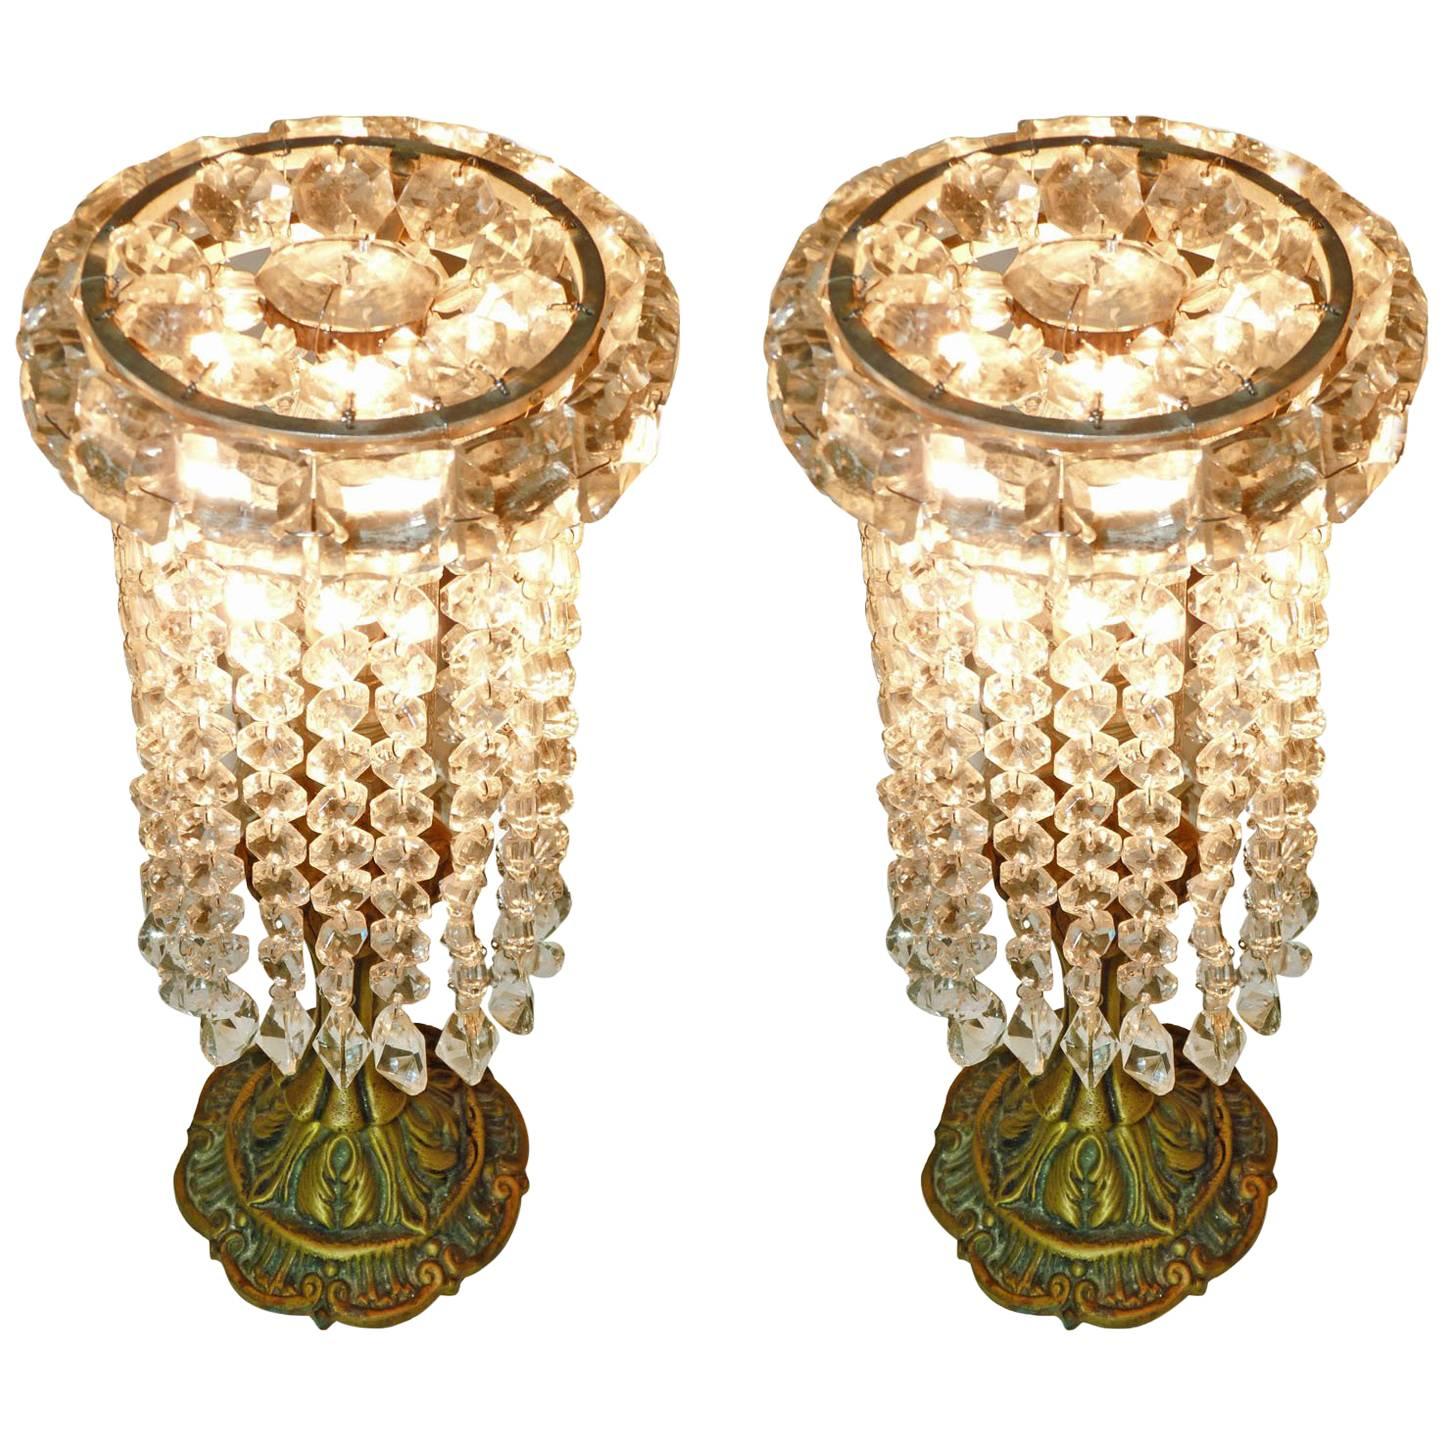 Pair of French Regency Empire in Bronze and Crystal Table Lamps